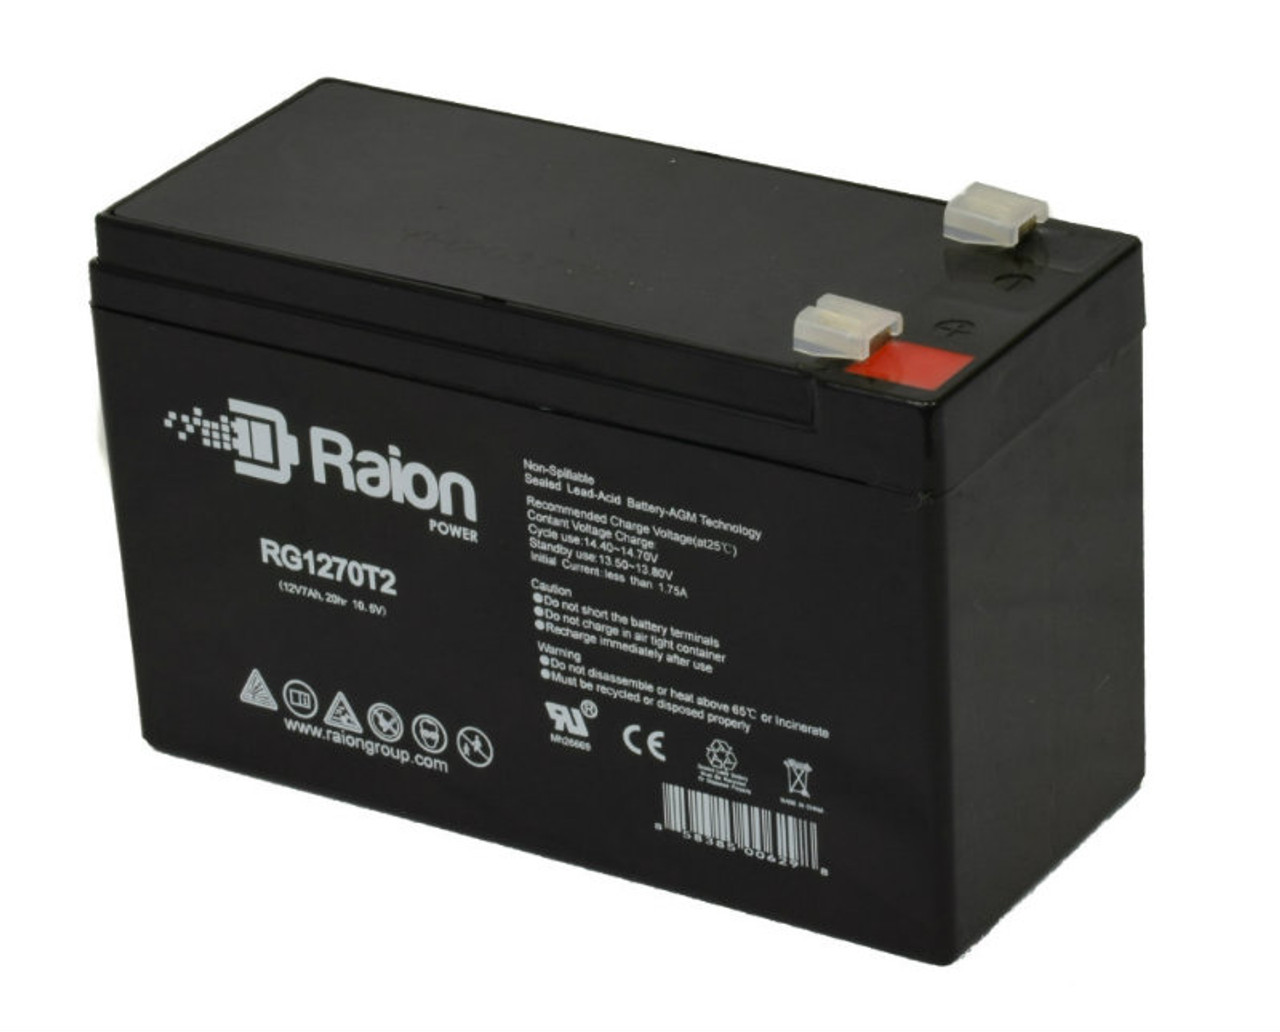 Raion Power RG1270T1 12V 7Ah Non-Spillable Replacement Battery for Leoch DJW12-7.2 F1